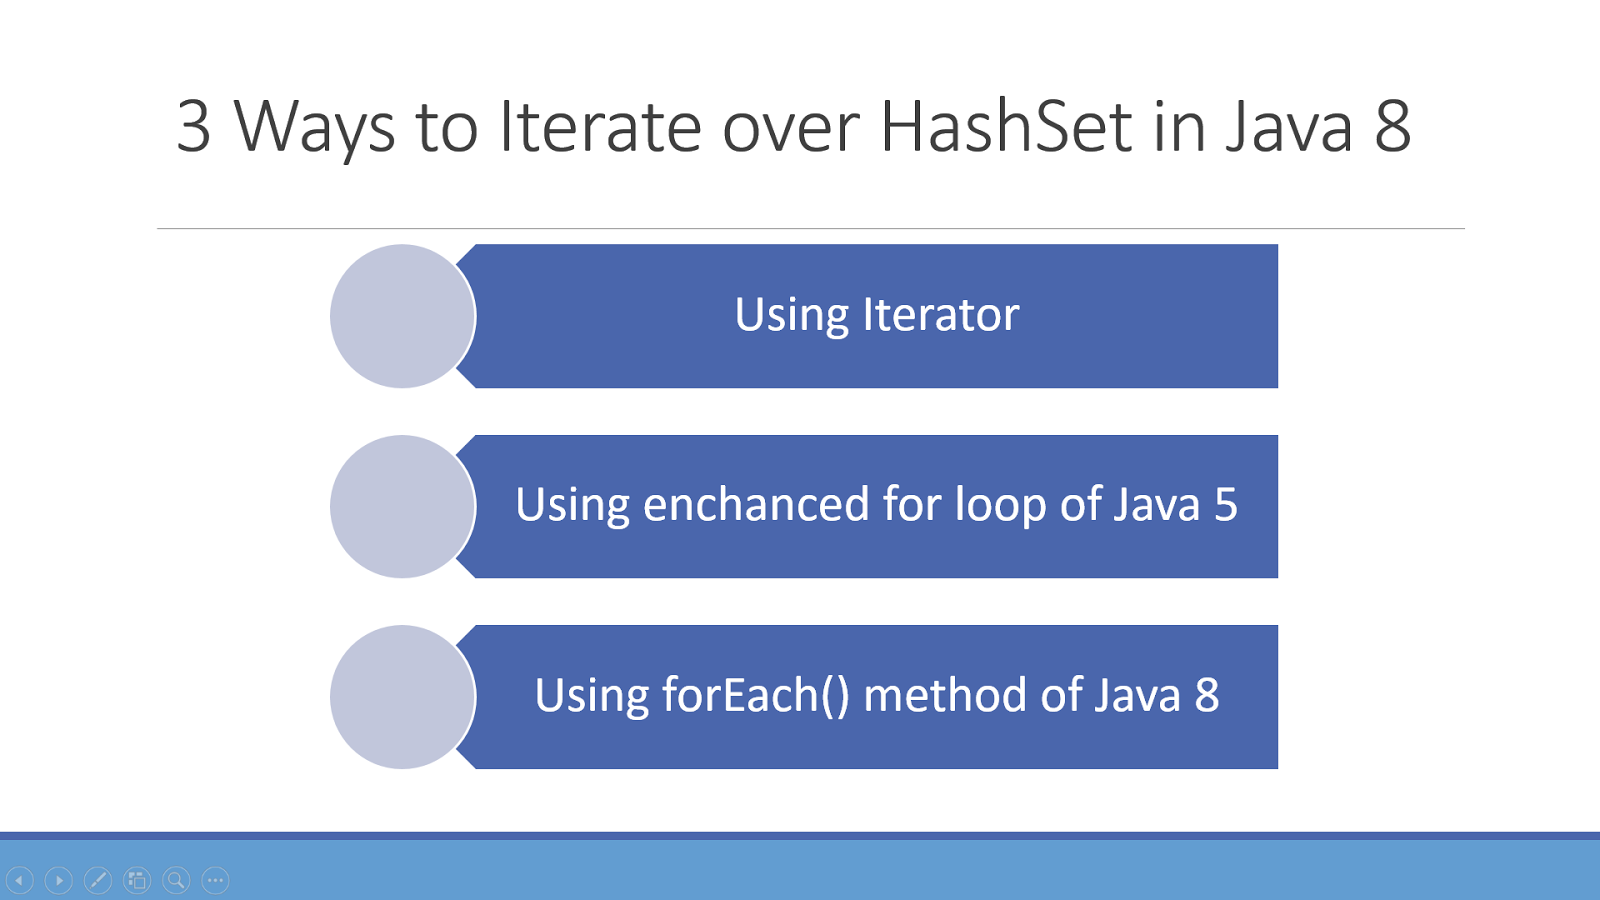 Iterate over. HASHSET java. Итератор java. Метод iterator java. Iterator java example.